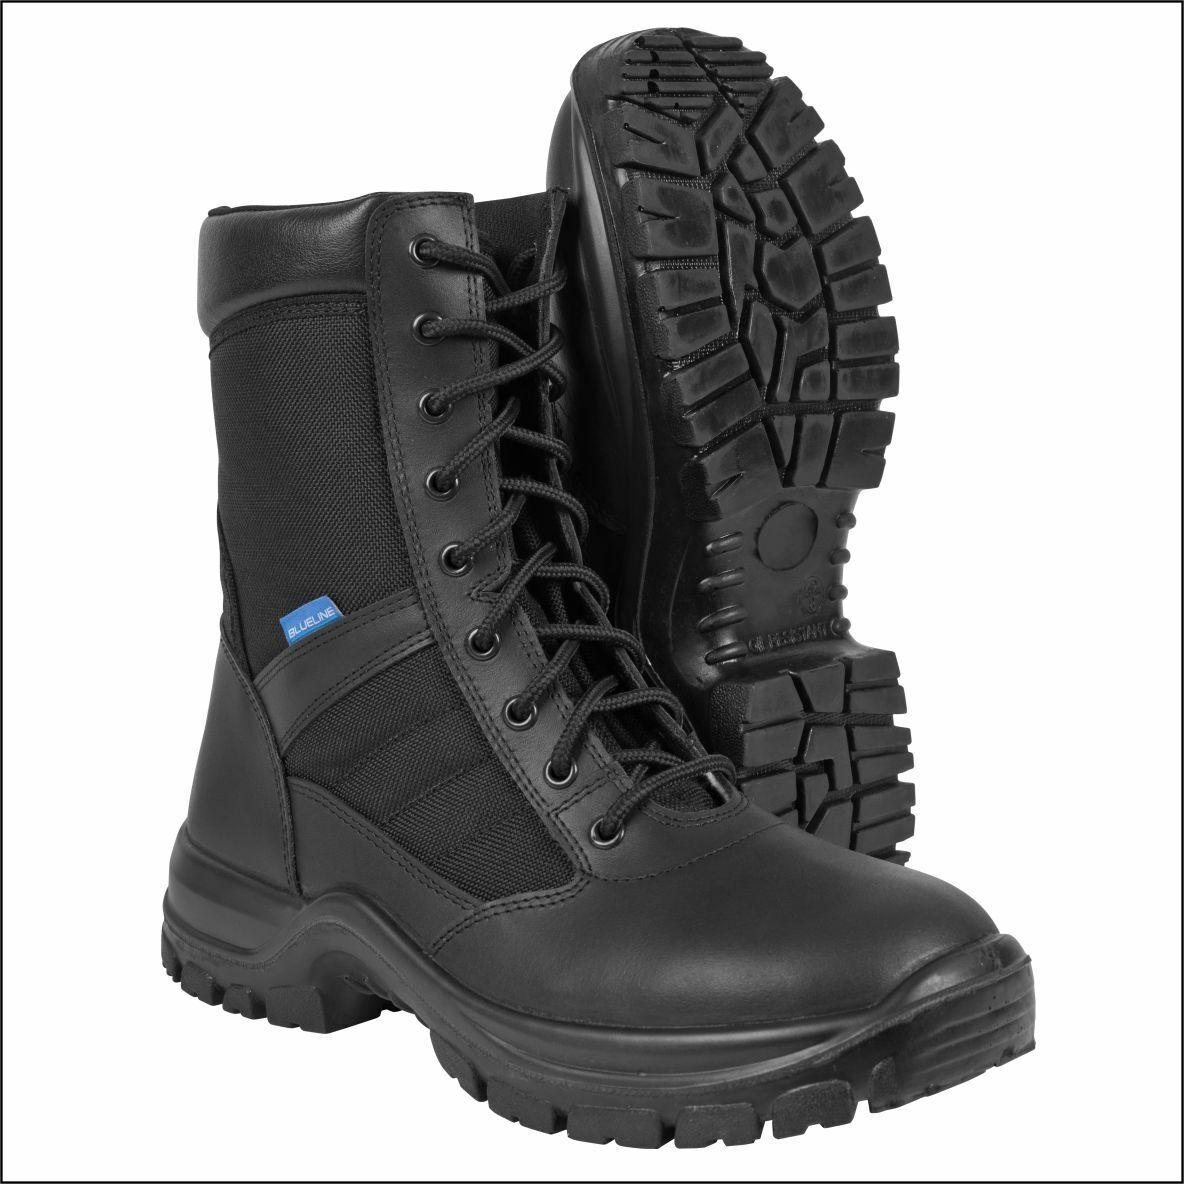 Patrol Boots | Police Boots